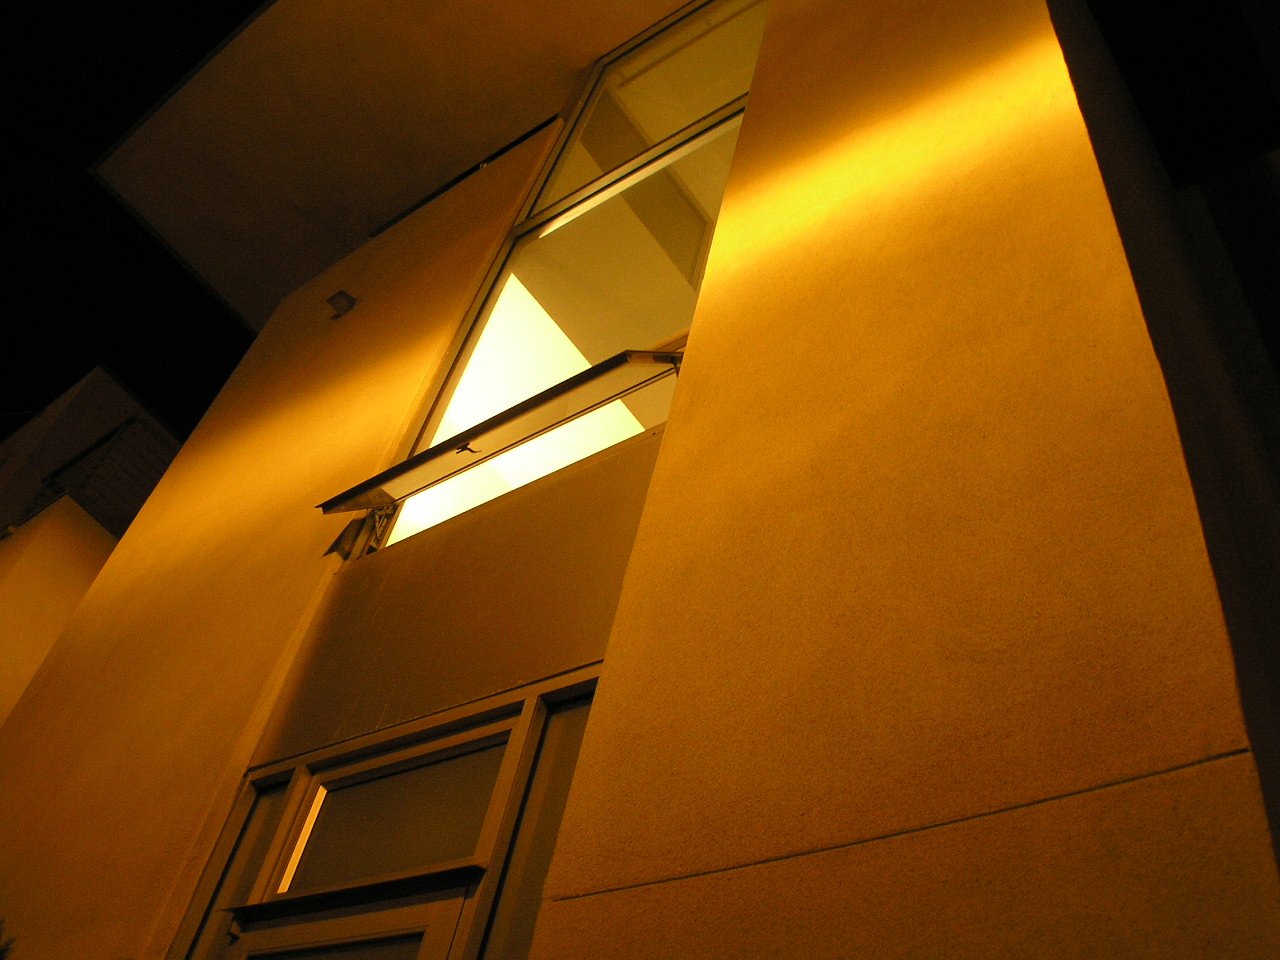 the building is illuminated by a lit up window